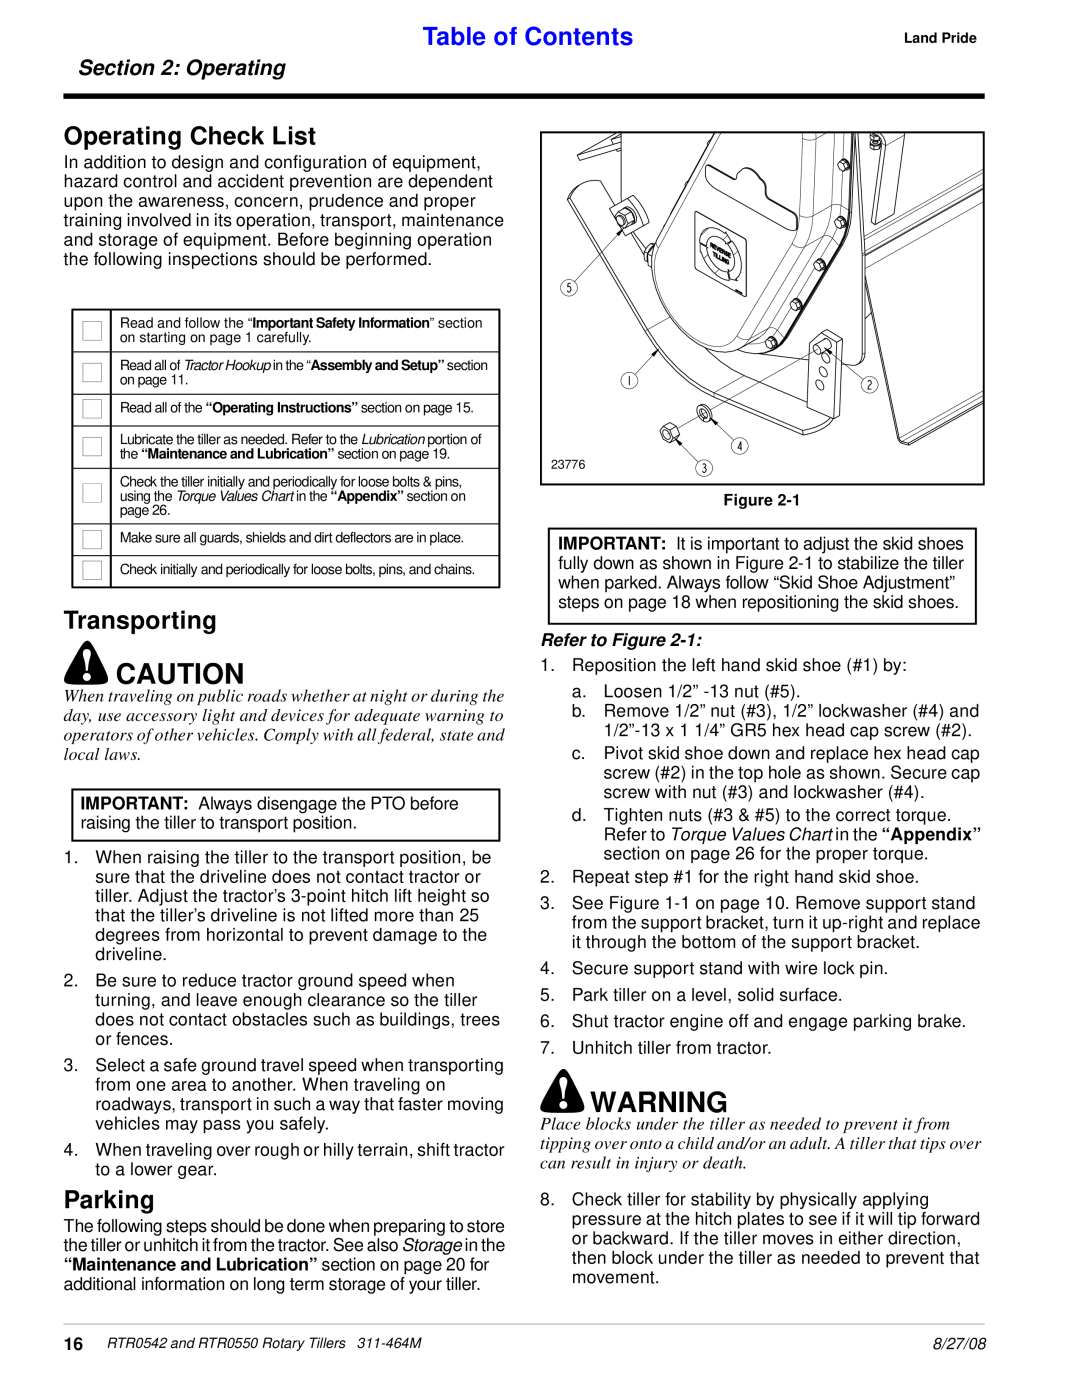 Land Pride RTR0542, RTR0550 manual Operating Check List, Transporting, Parking, Table of Contents, Refer to Figure 